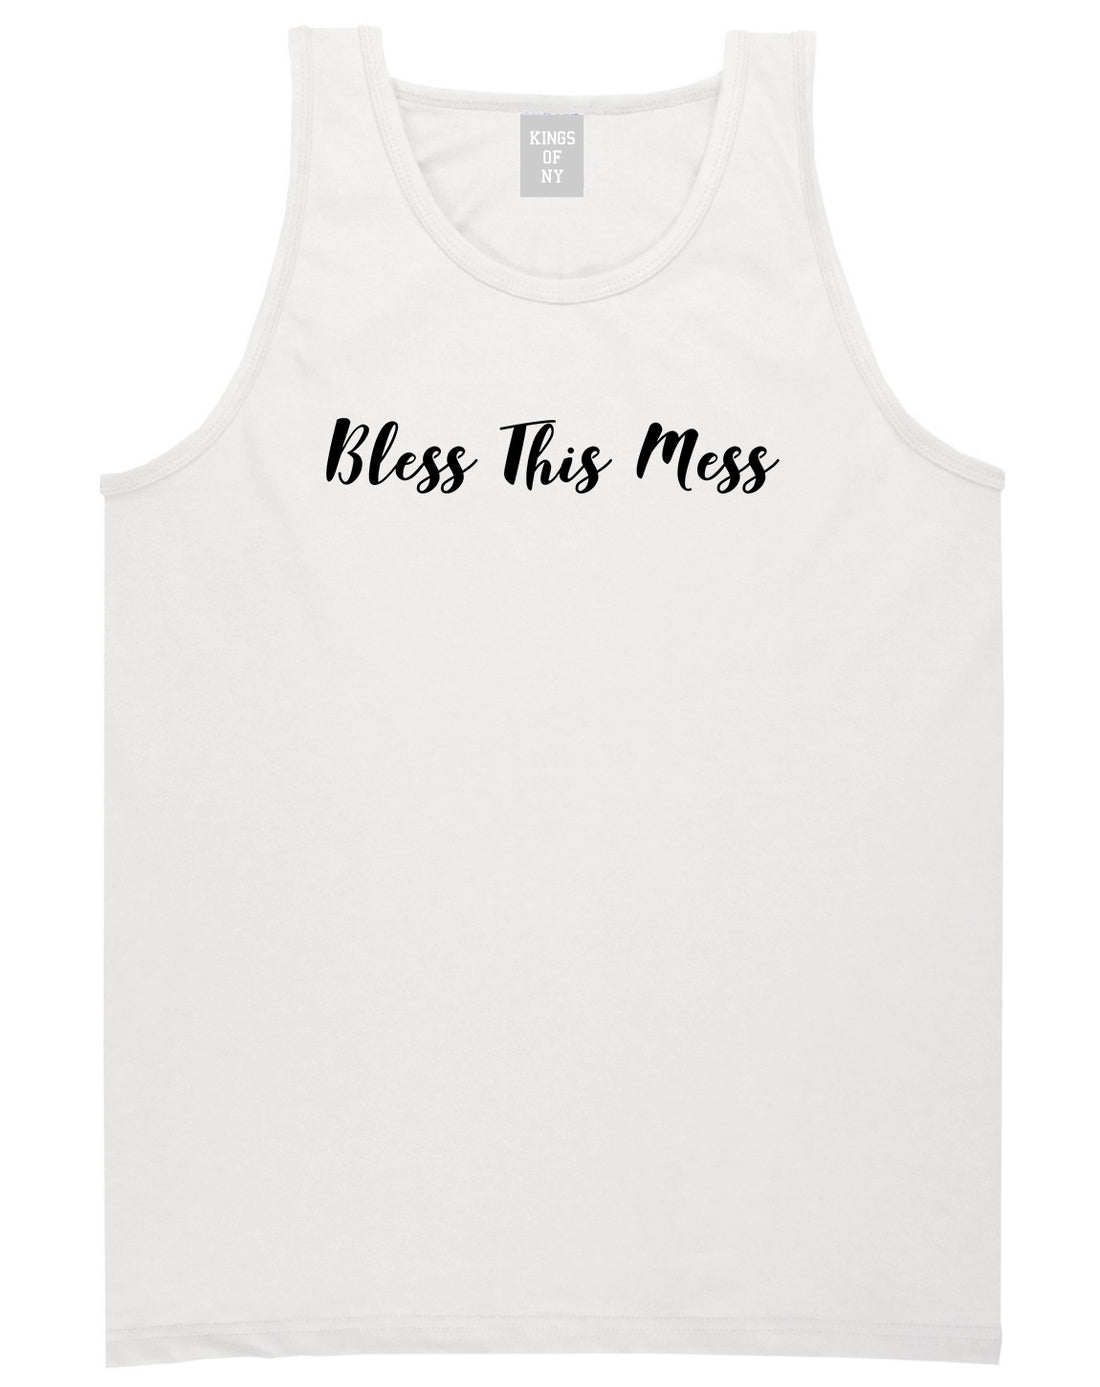 Bless This Mess White Tank Top Shirt by Kings Of NY